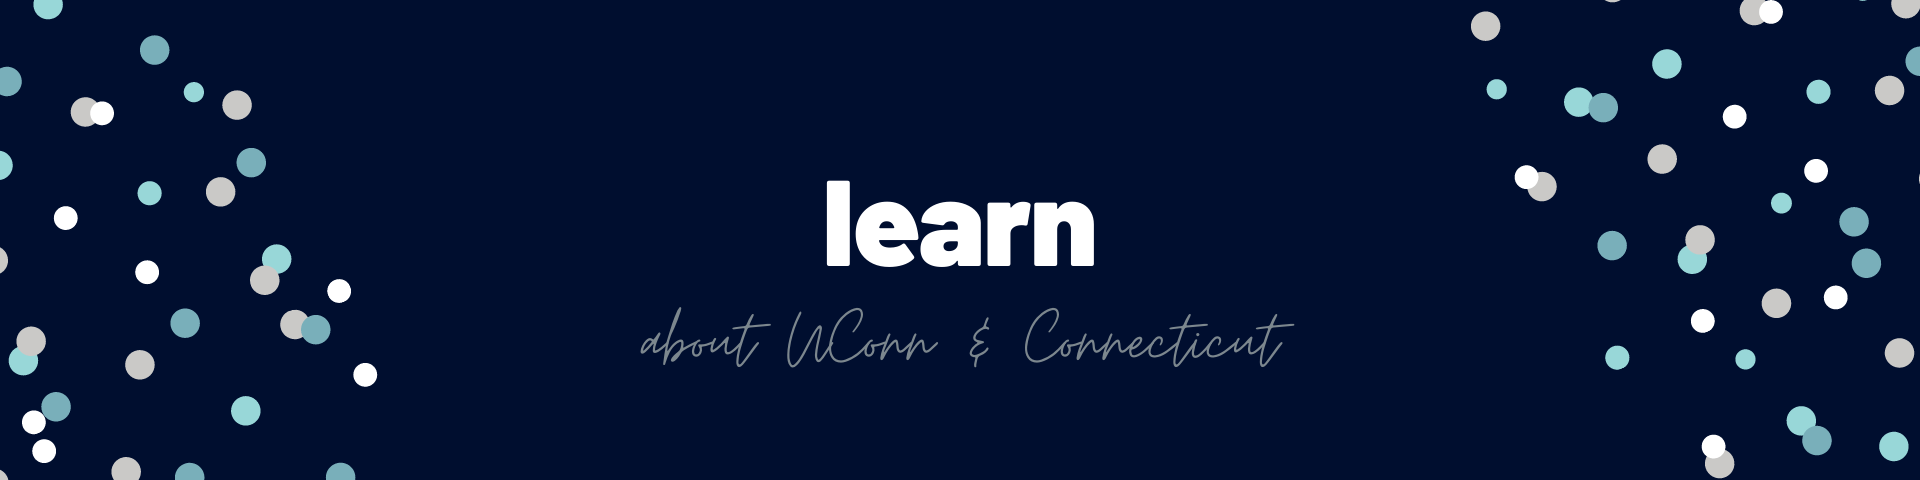 Learn About UConn and Connecticut.